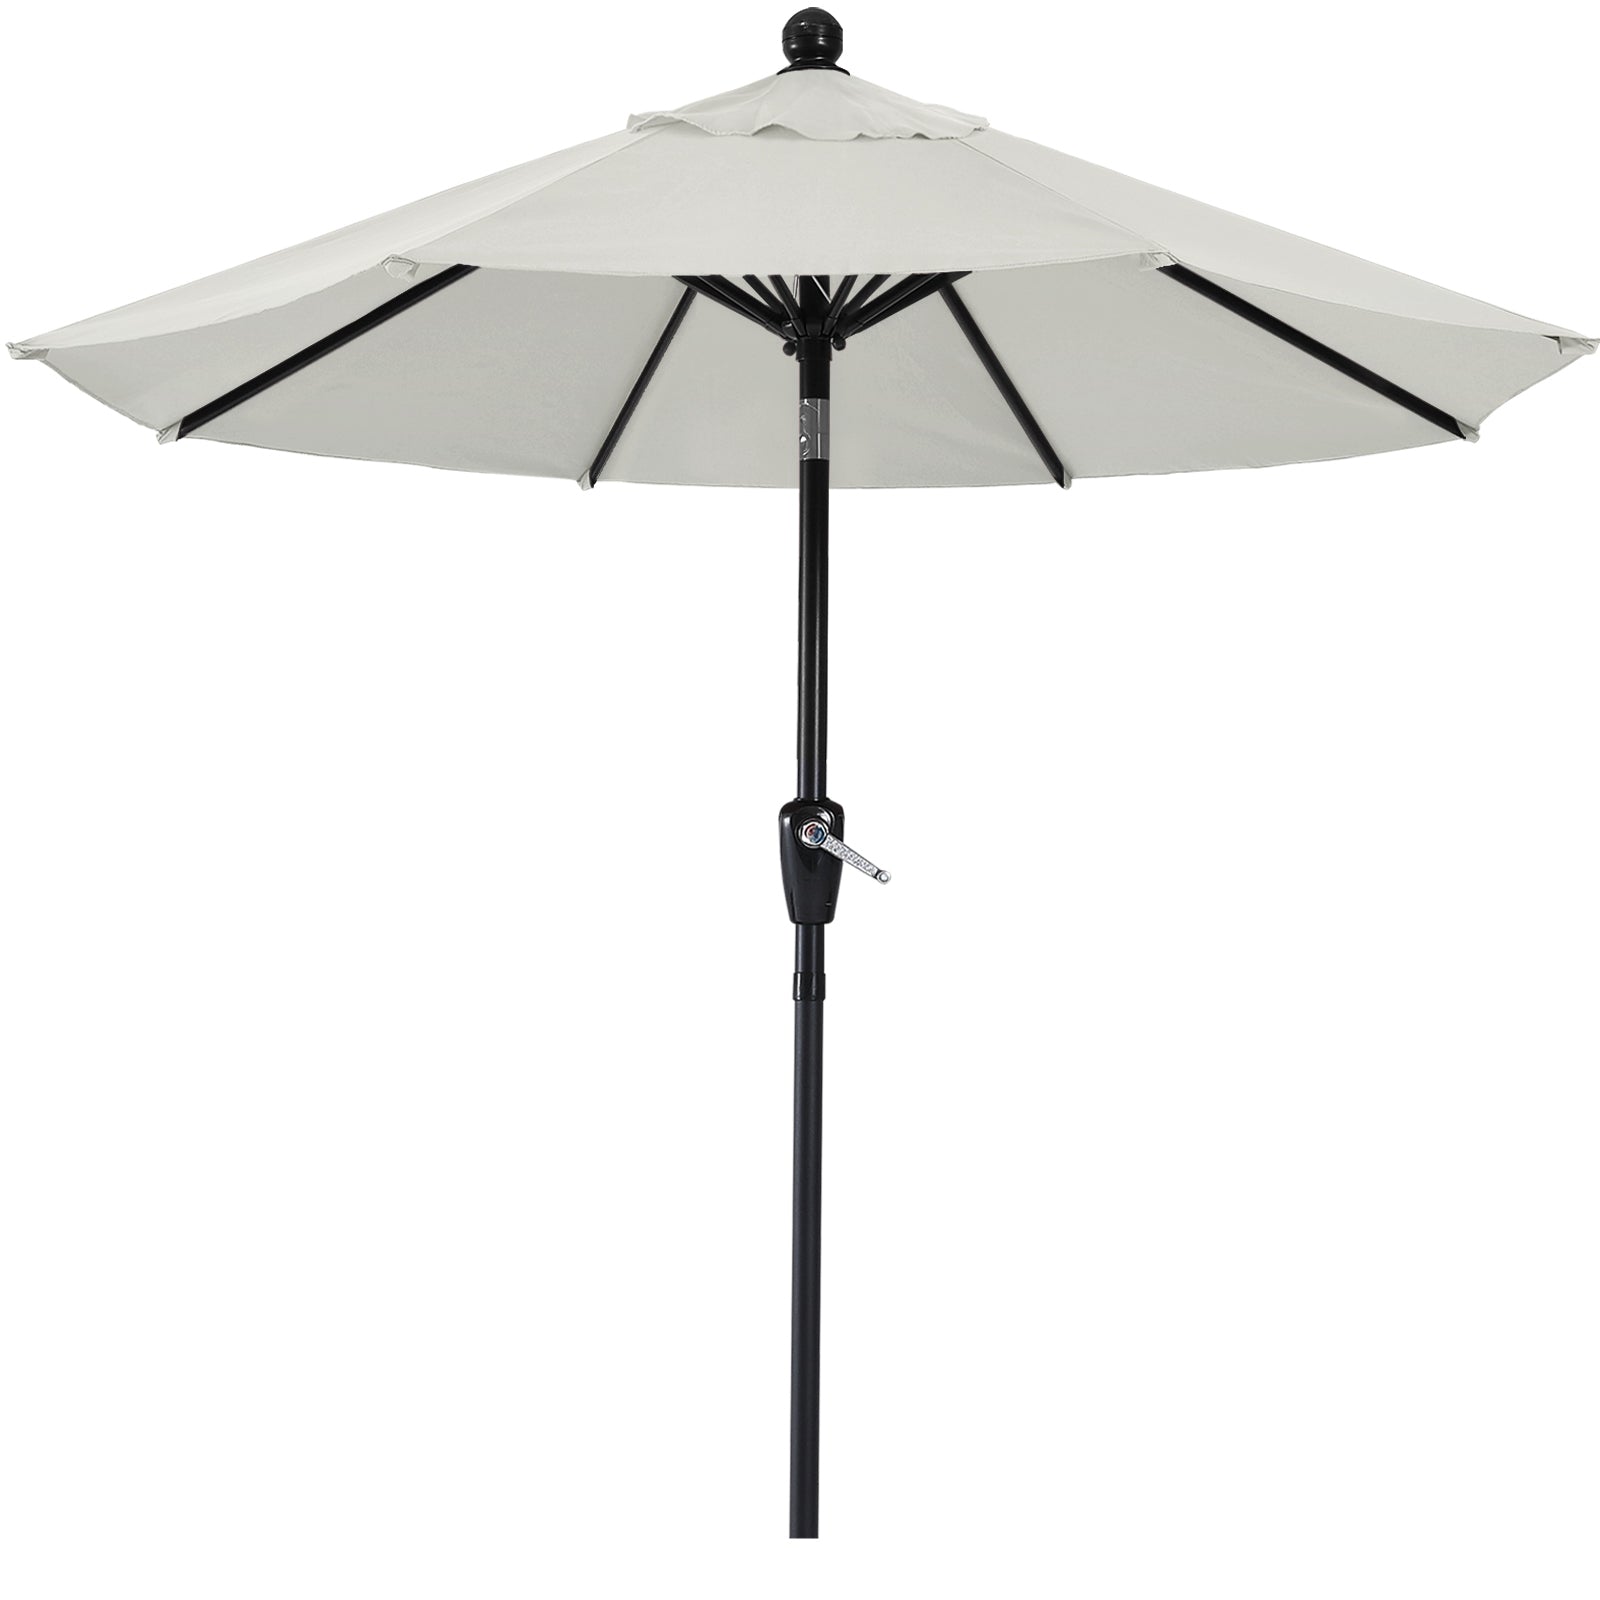 Outdoor Waterproof Table 8 Ribs Umbrella with Push Button Tilt and Crank